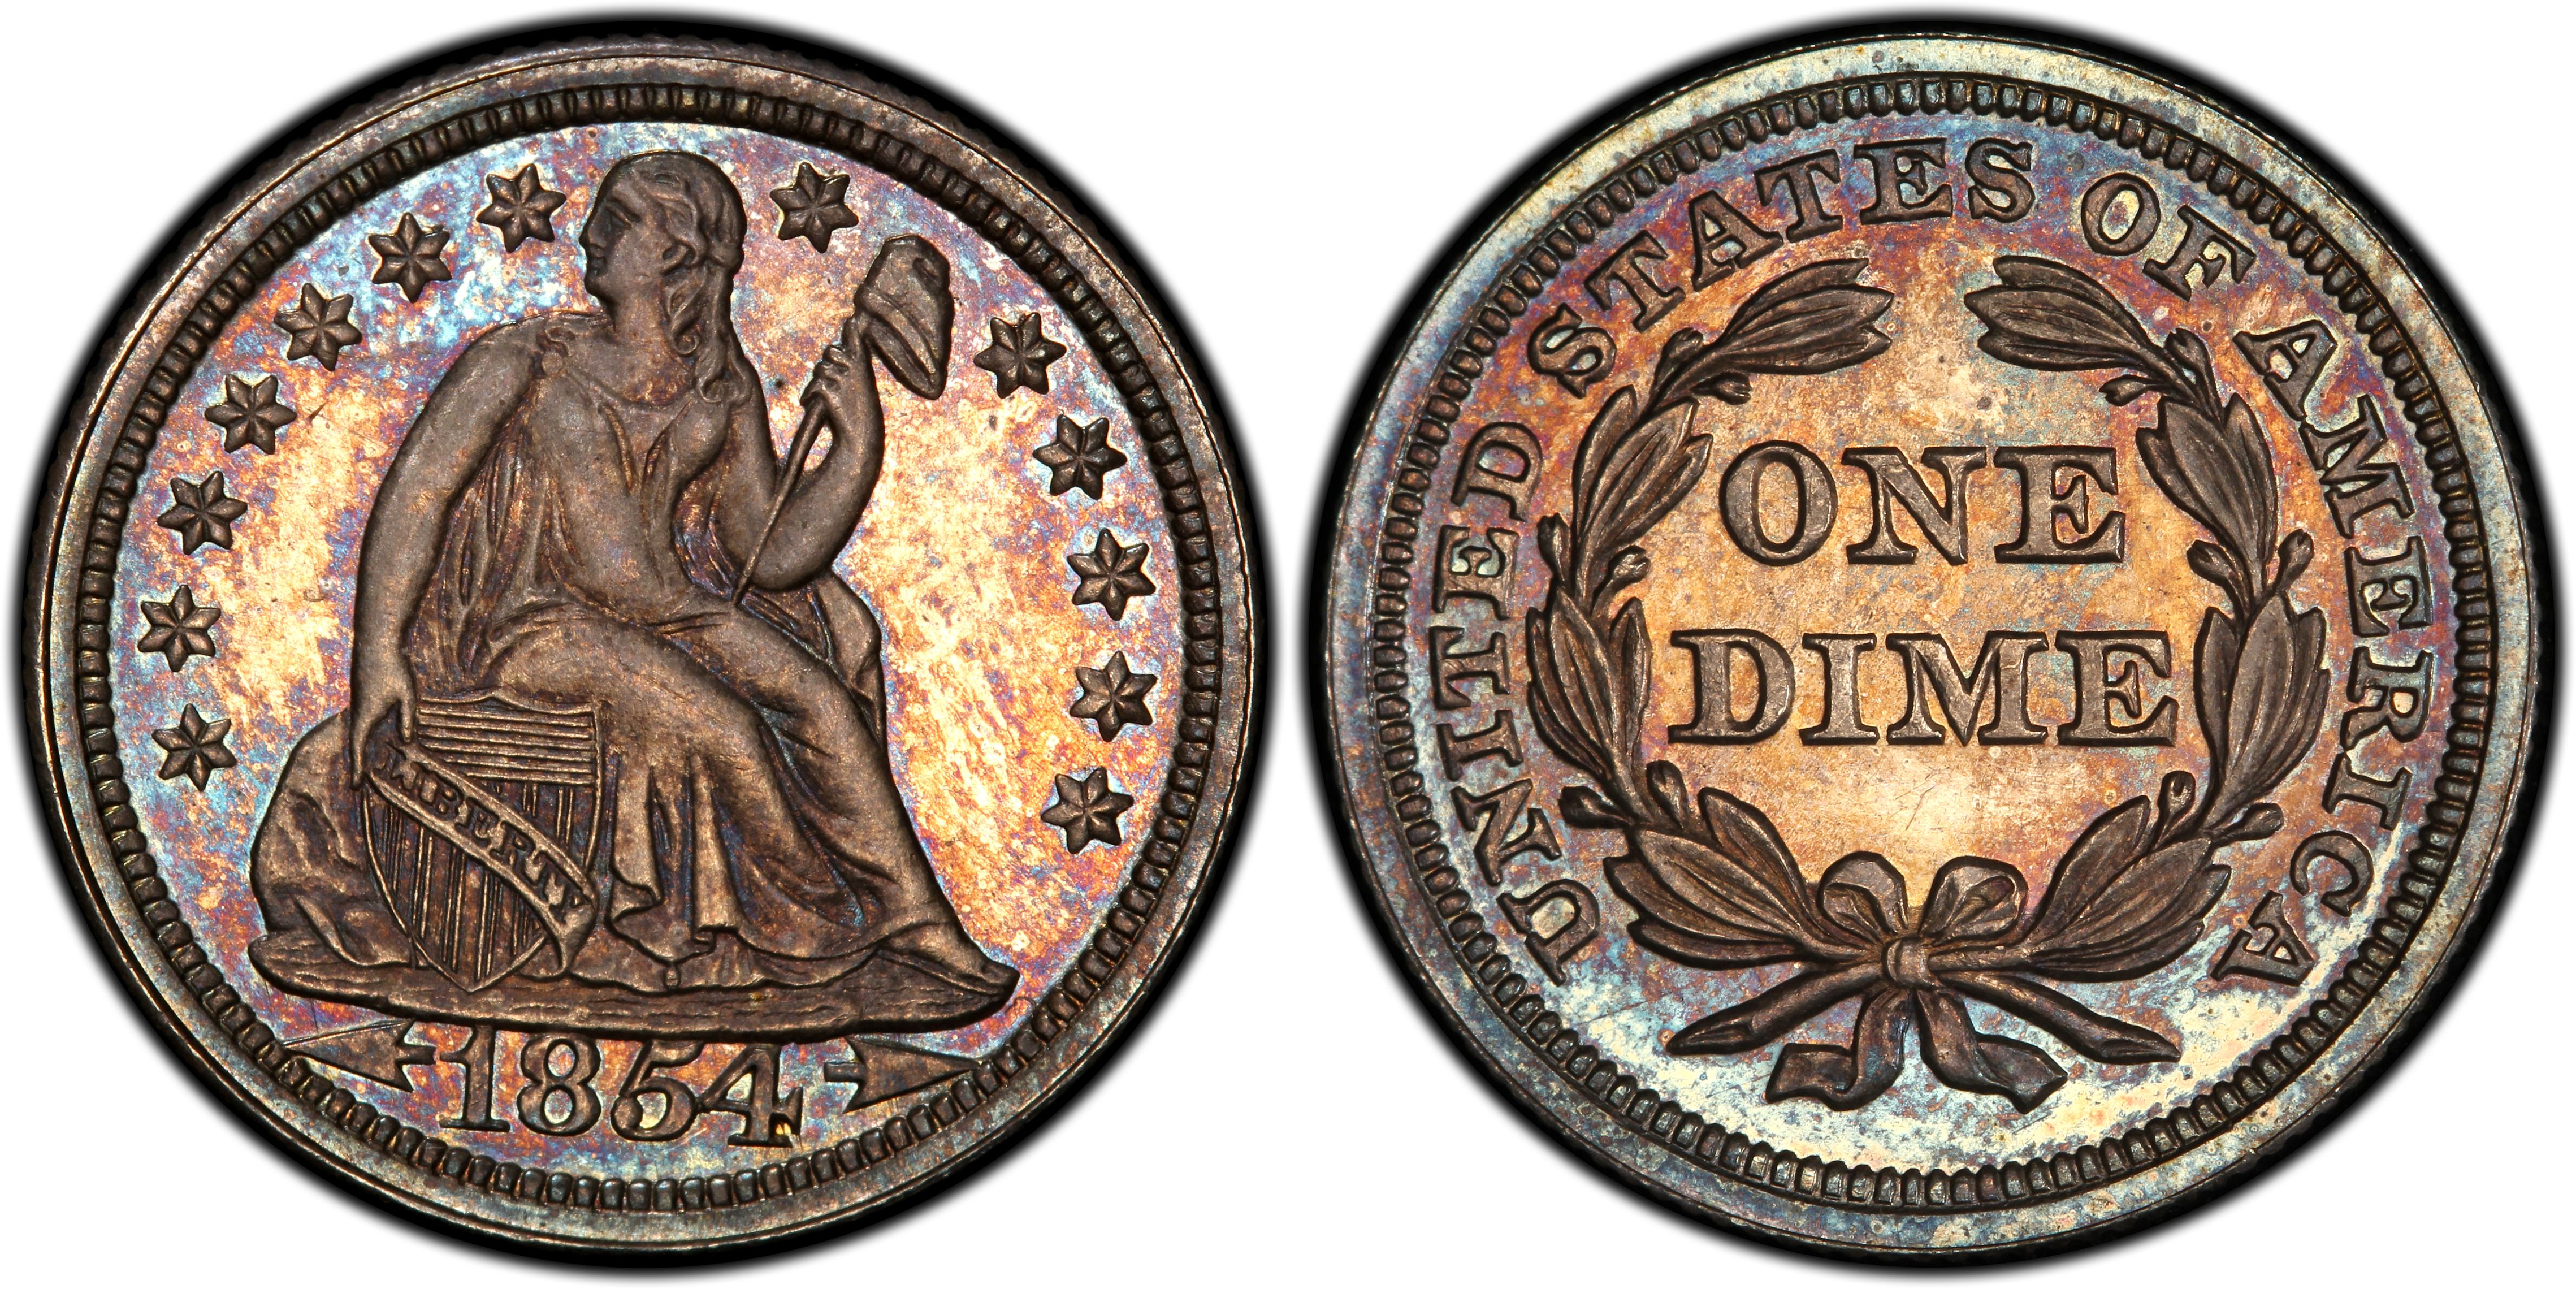 1854 10C Arrows (Proof) Liberty Seated Dime - PCGS CoinFacts